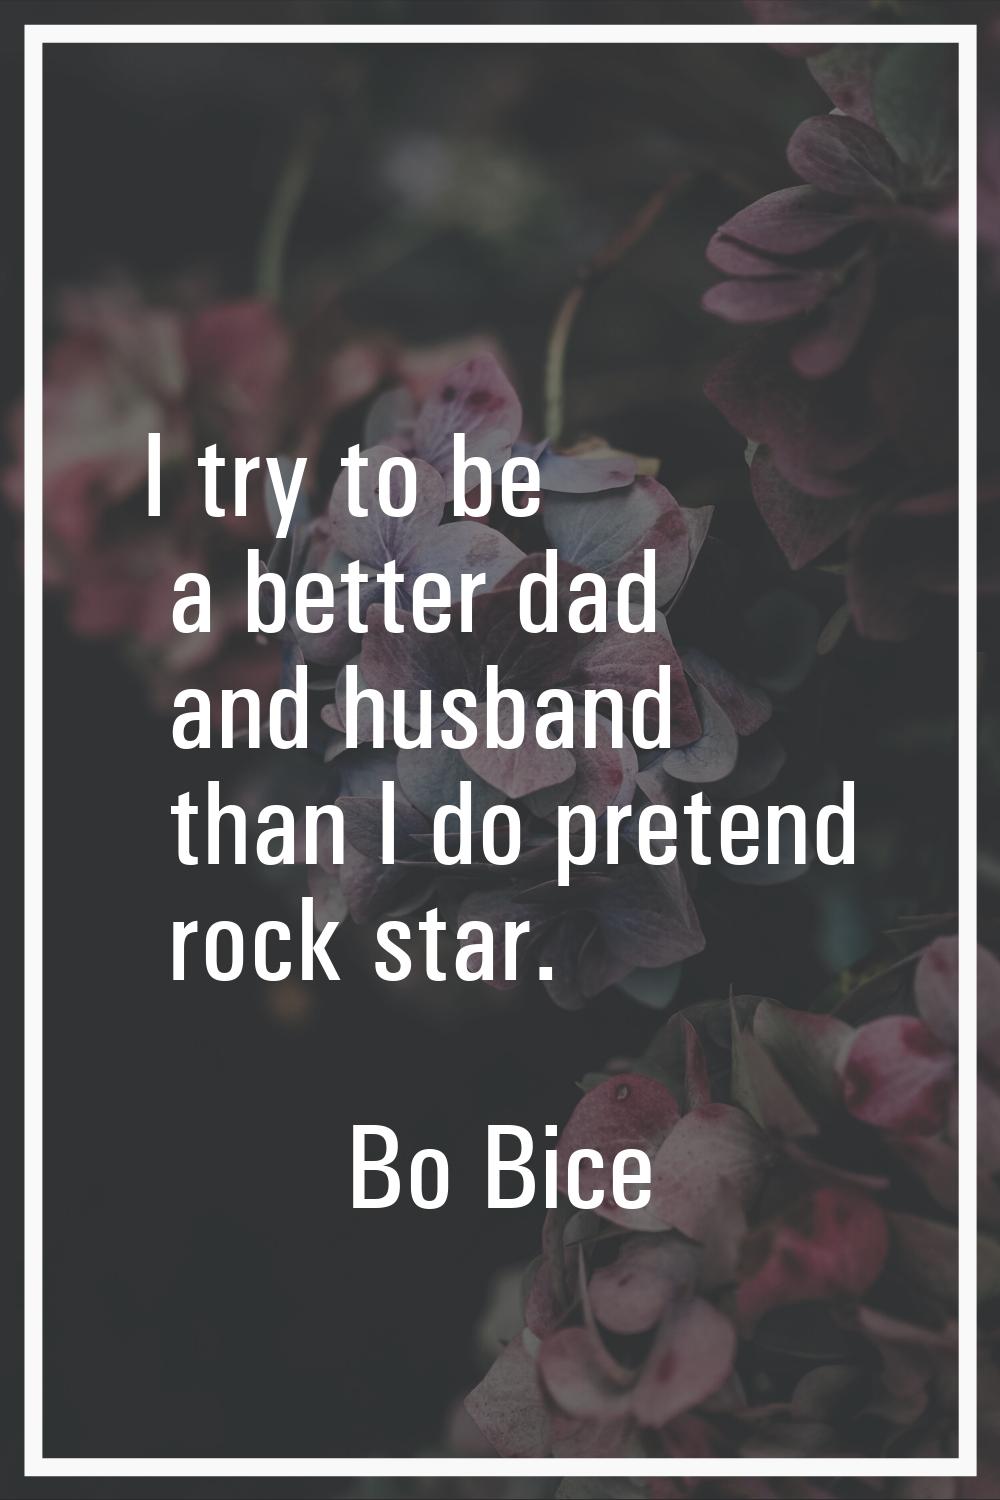 I try to be a better dad and husband than I do pretend rock star.